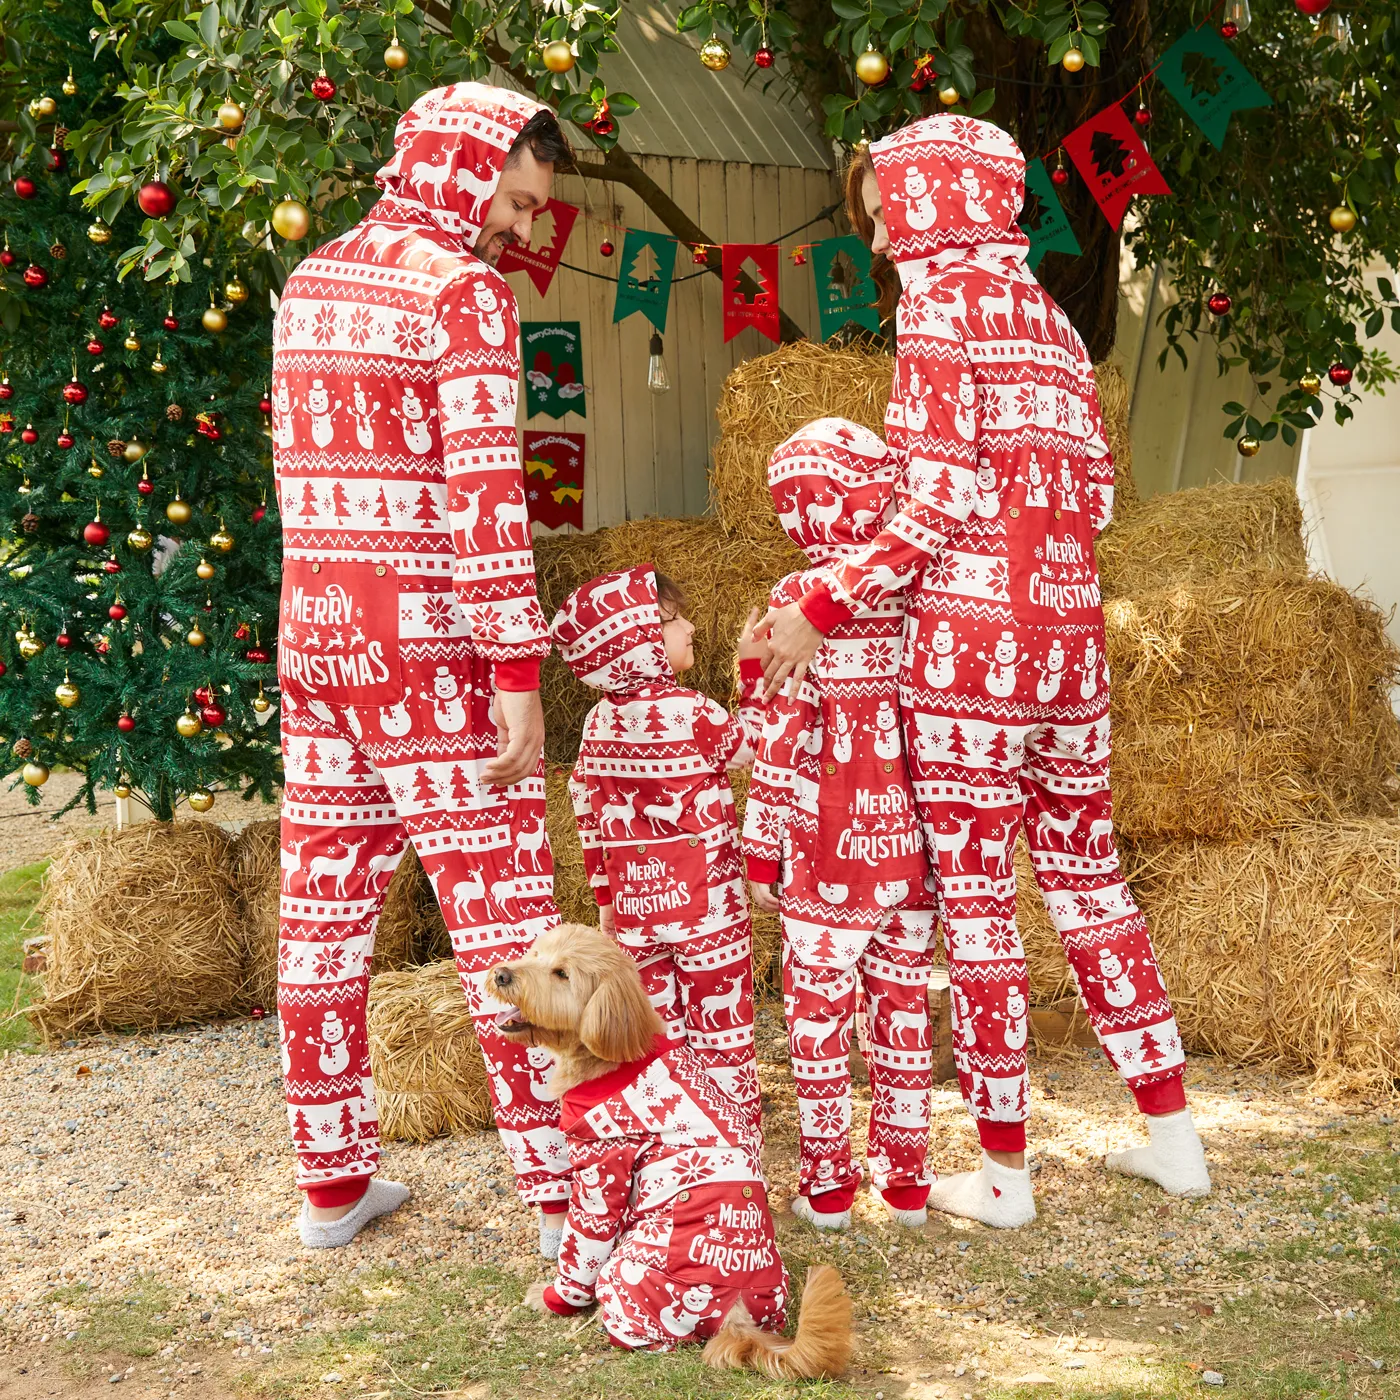 Christmas Family Matching Allover Red Print Long-sleeve Hooded Zipper Onesies Pajamas Sets (Flame Resistant)